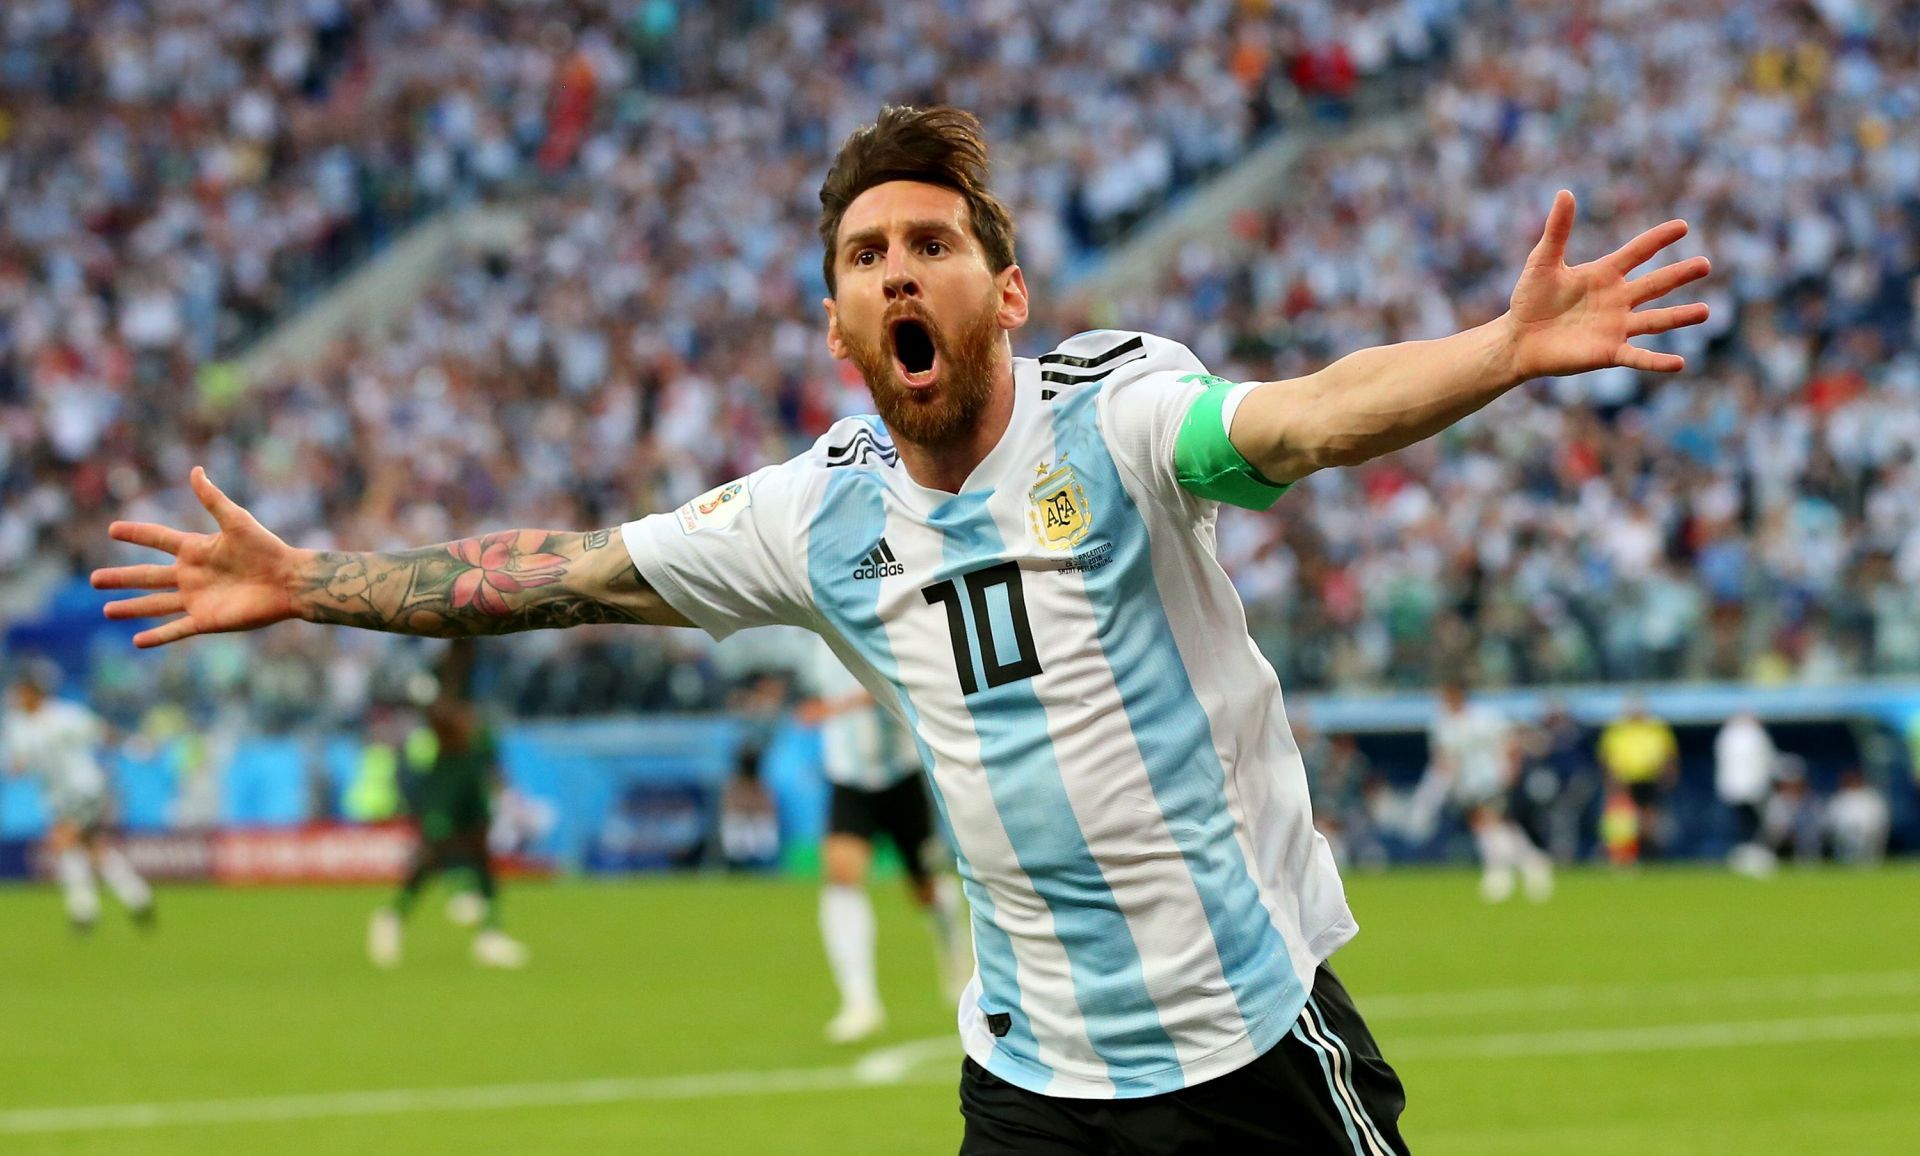 Lionel Messi has saved Argentina on numerous occasions